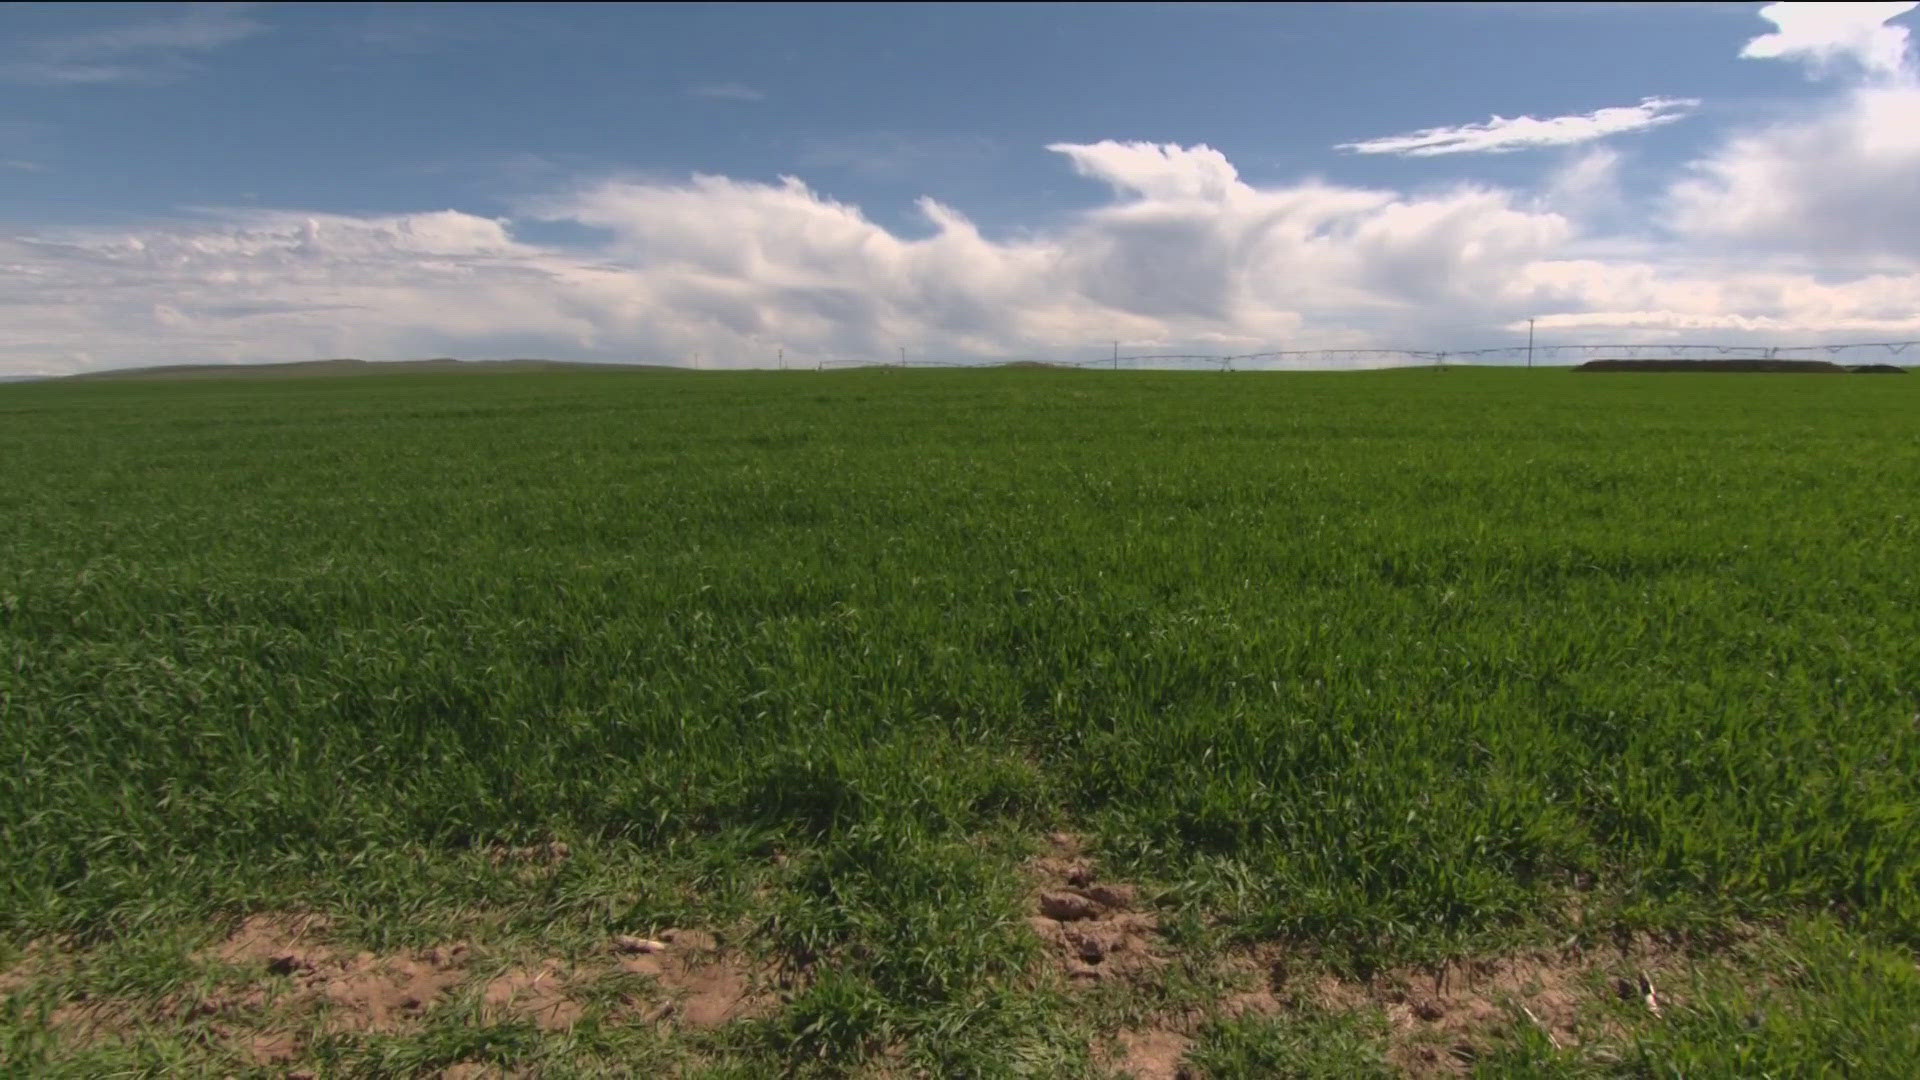 The project would cover nearly 2,400 acres just north of Melba.